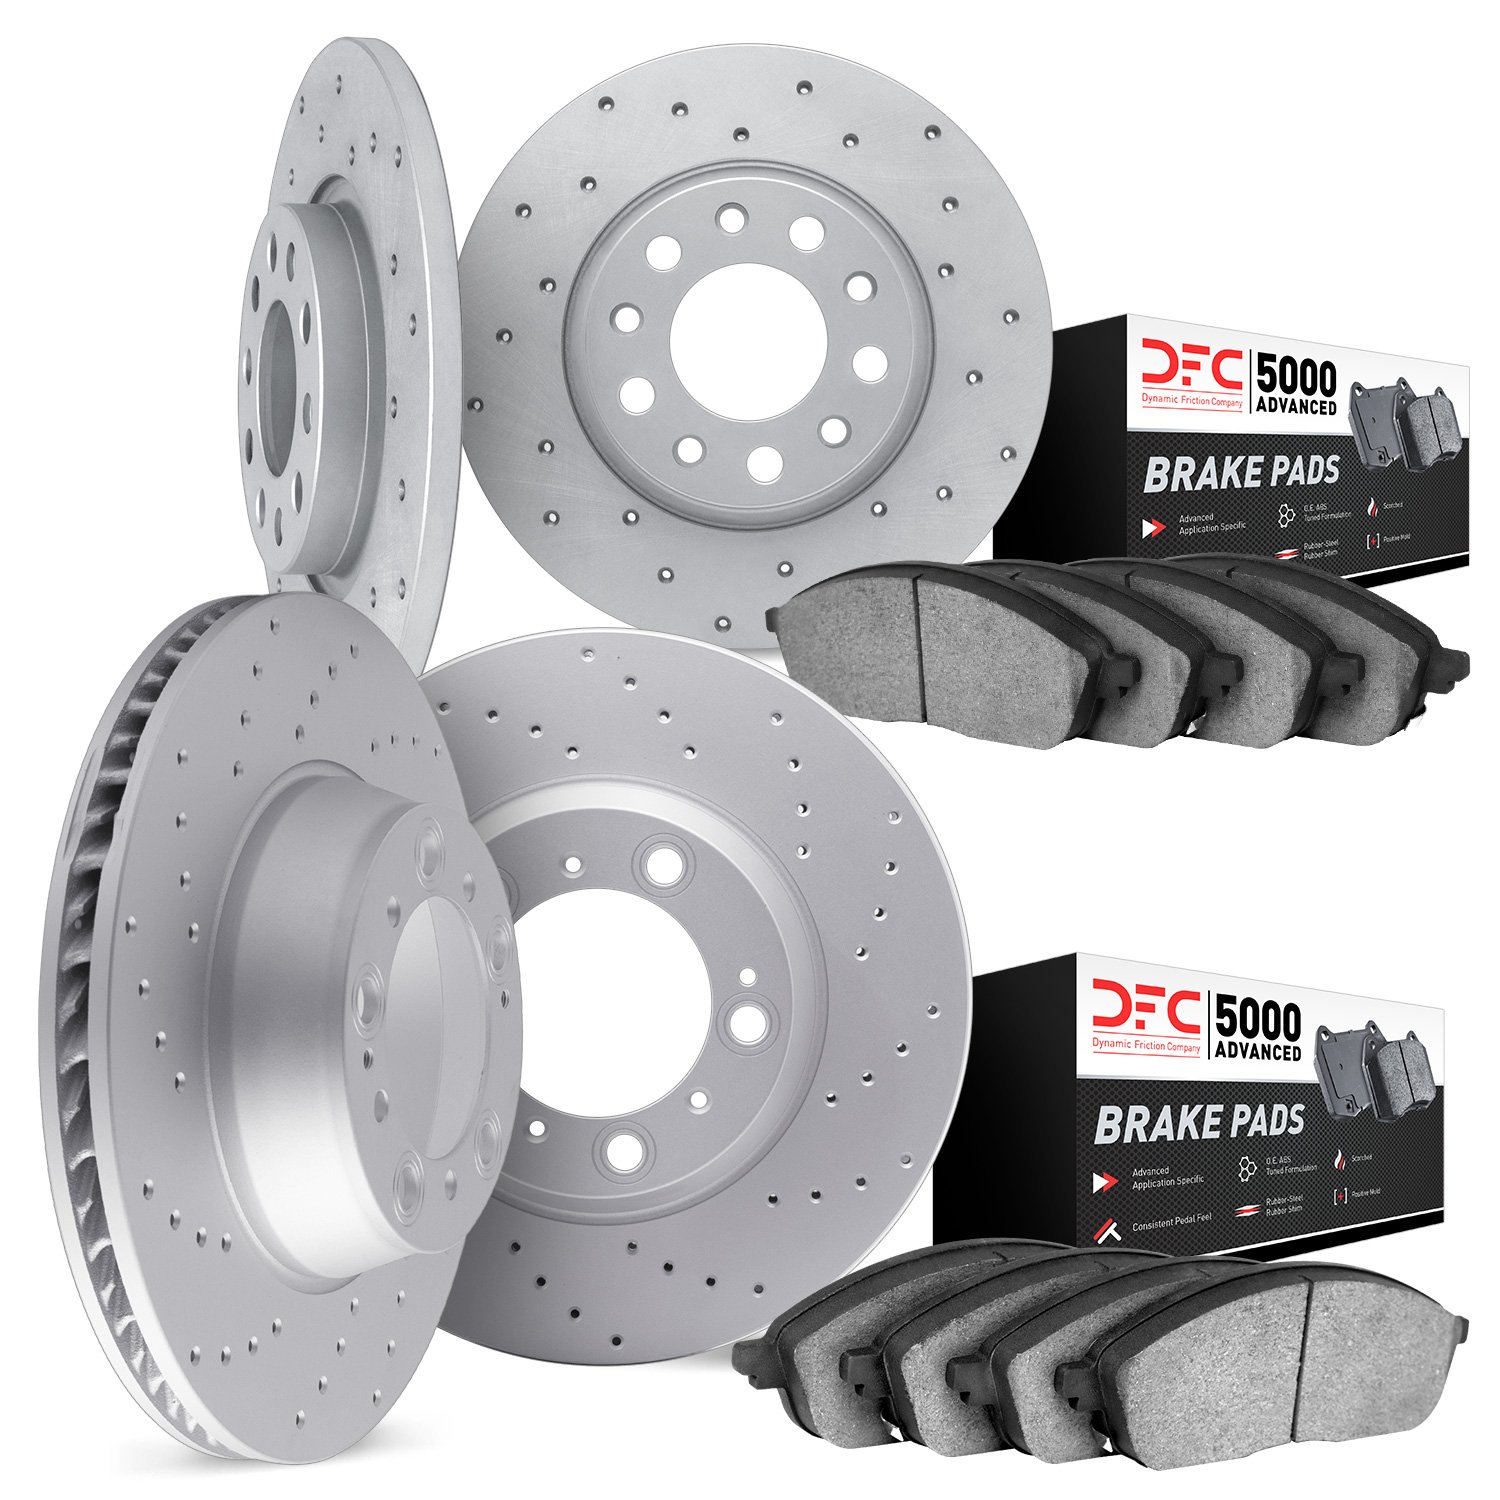 2704-58003 Geoperformance Drilled Brake Rotors with Active Performance Pads Kit, 2004-2008 Acura/Honda, Position: Front and Rear